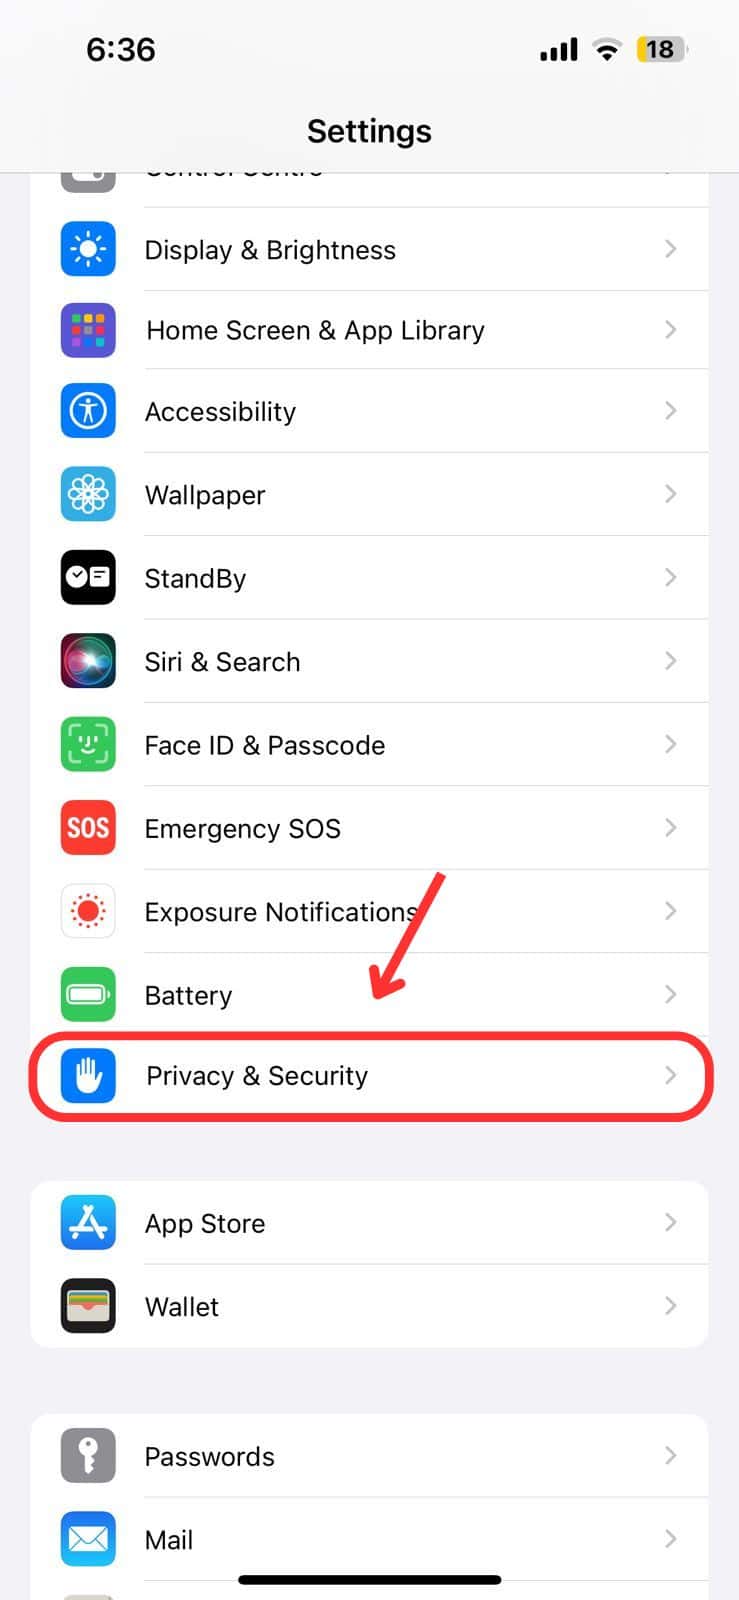 Tap on Privacy and Security